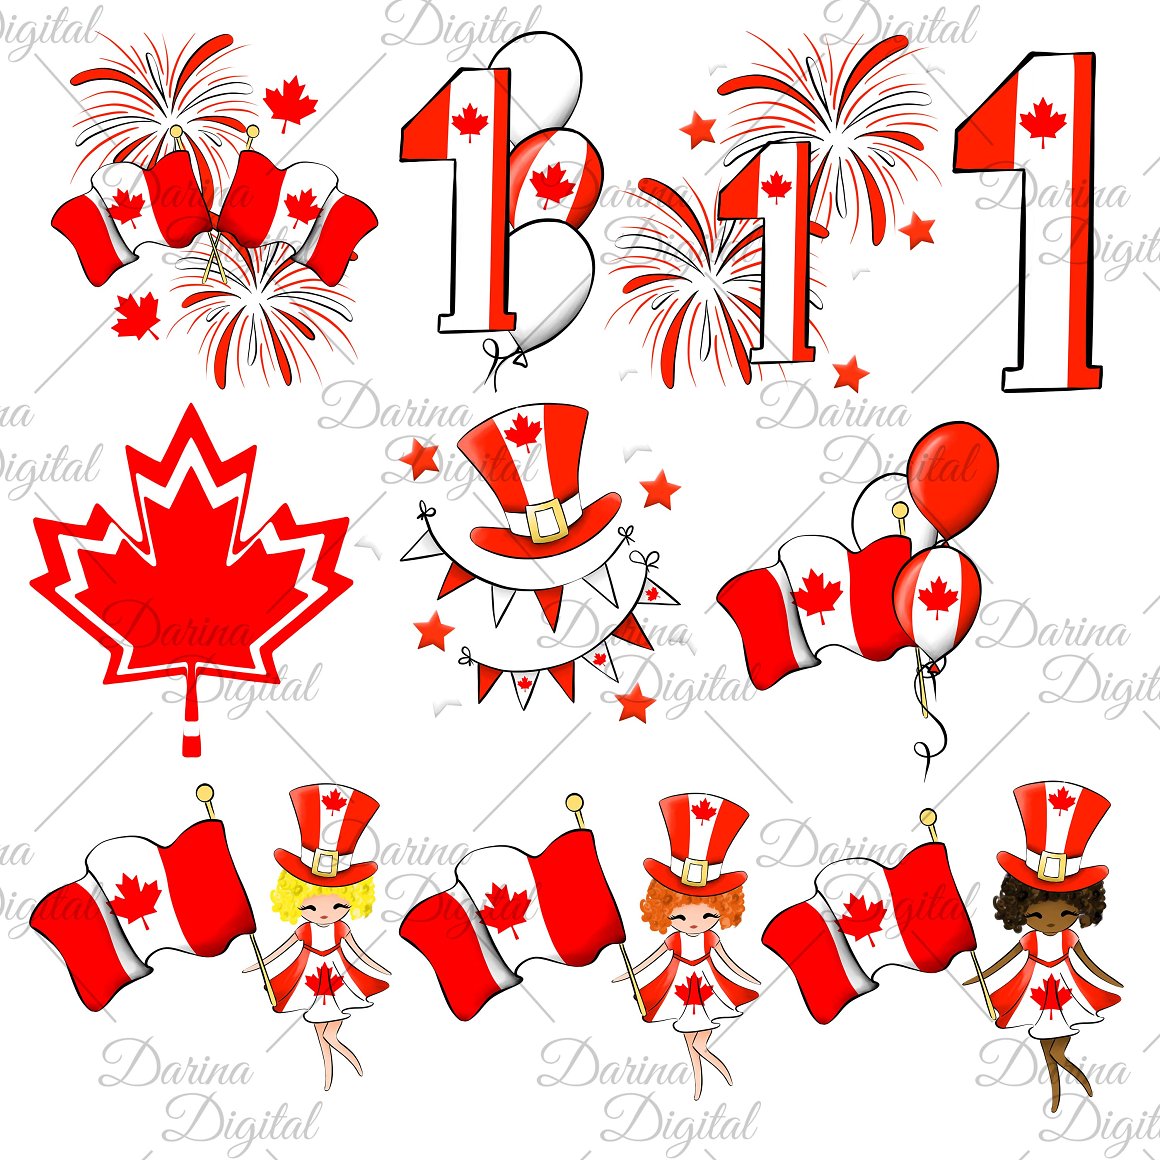 Great fonts for the Canadian holiday.